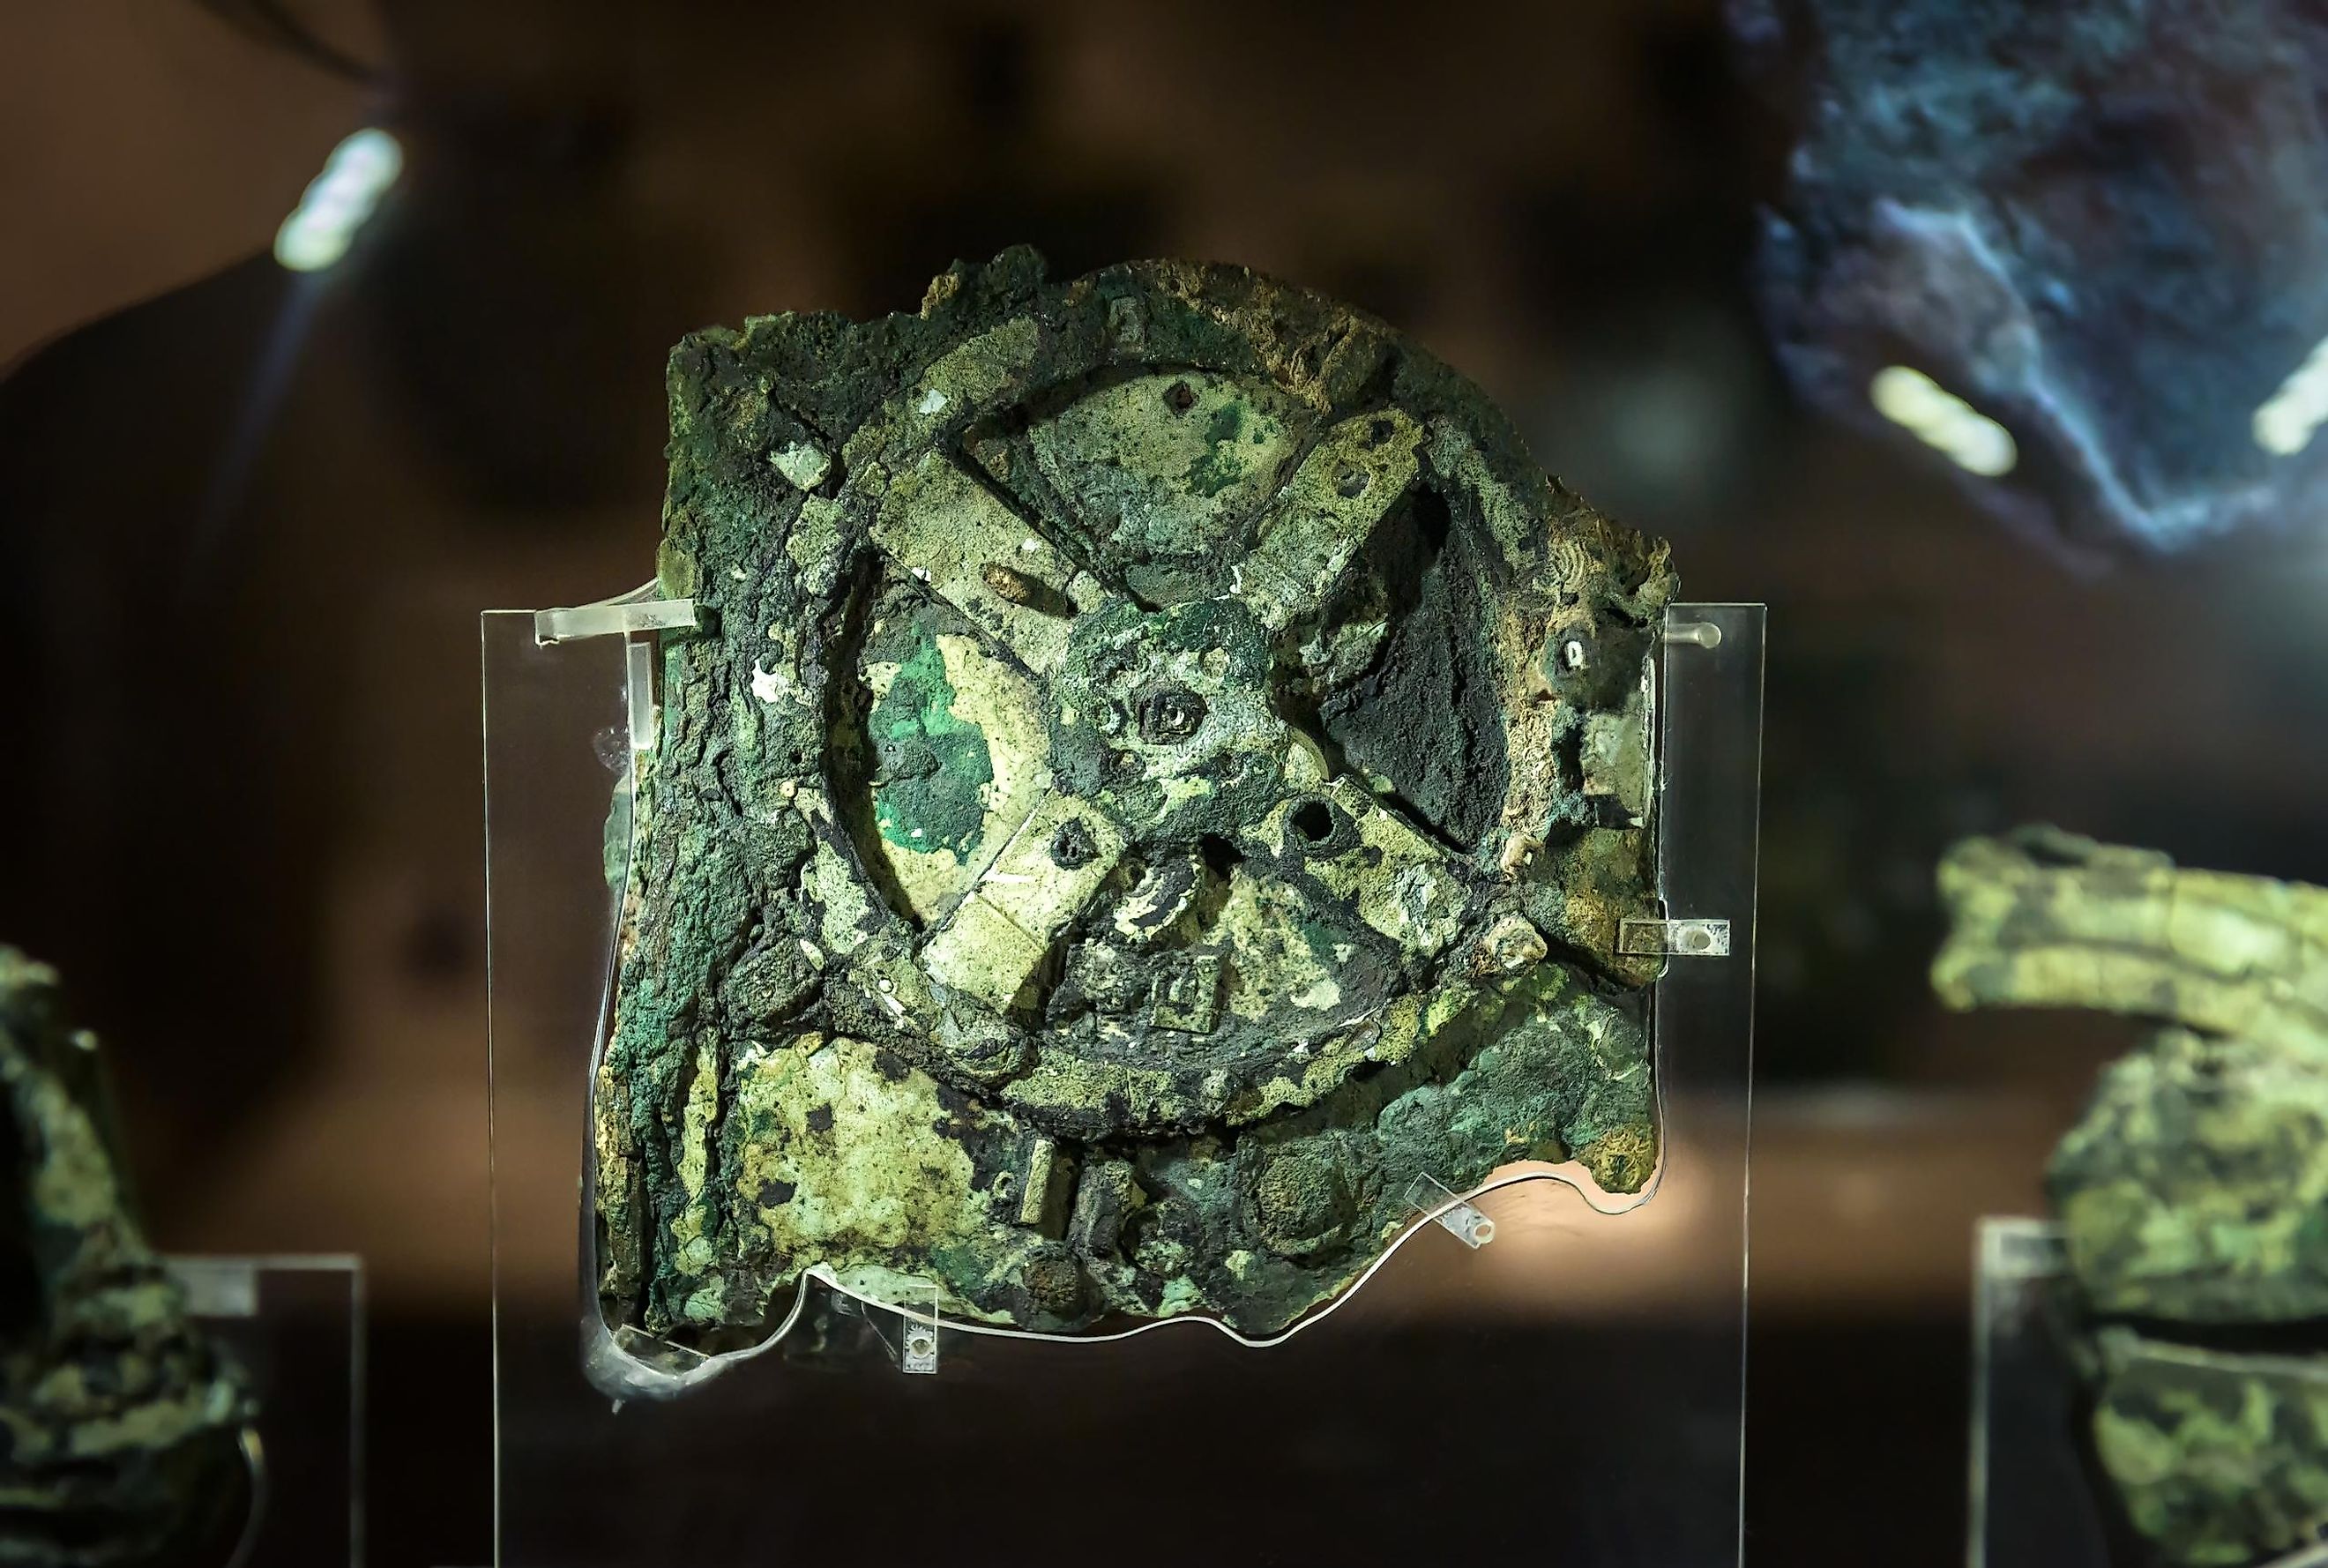 Antikythera mechanism in National Archaeological Museum, Athens, Greece.